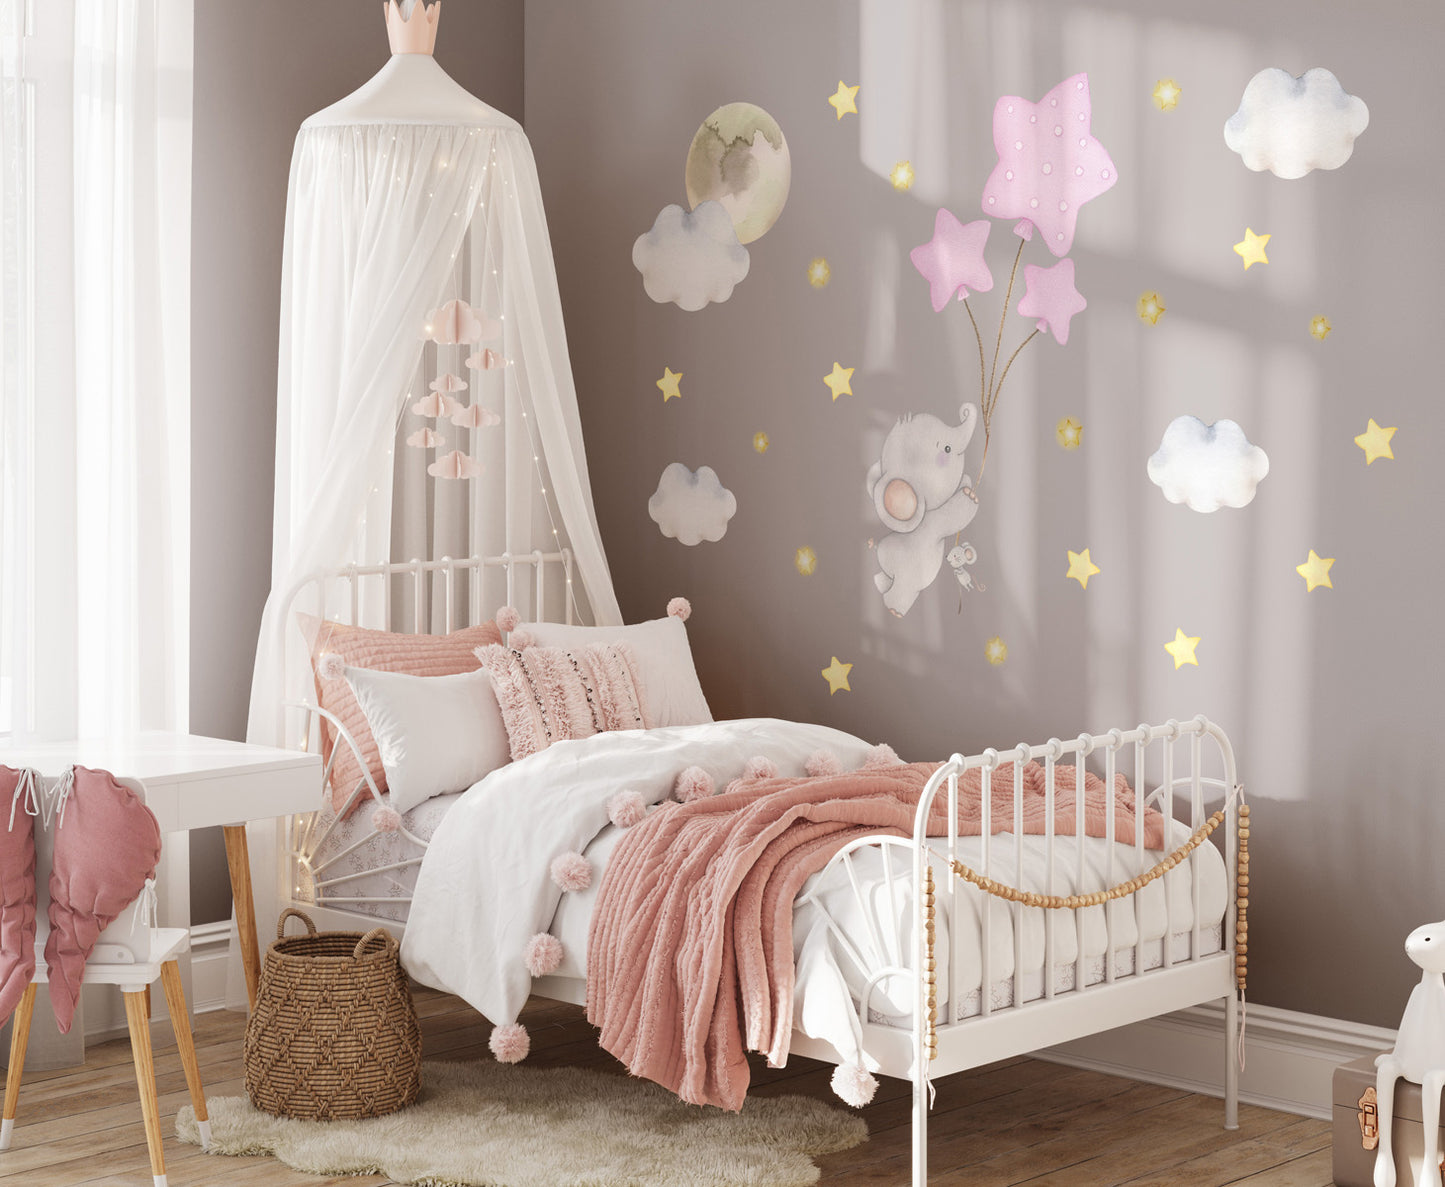 Elephant with balloons. Clouds. Big wall decals for girl's room. Gold stars.